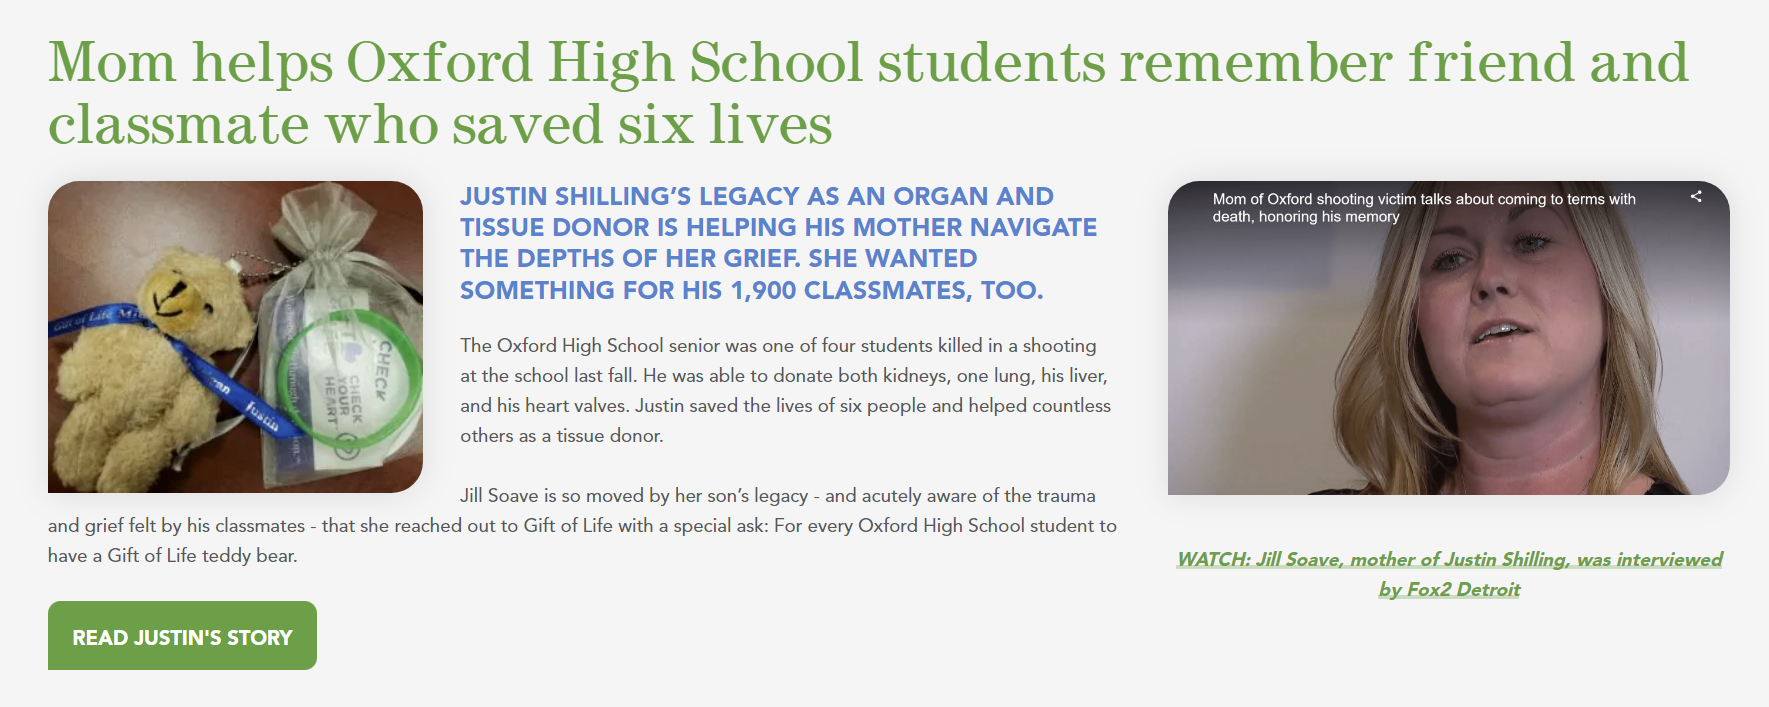 Screenshot of the Summer 2022 edition of LifeLINES featuring the story of Justin Shilling, Oxford High School student and donor